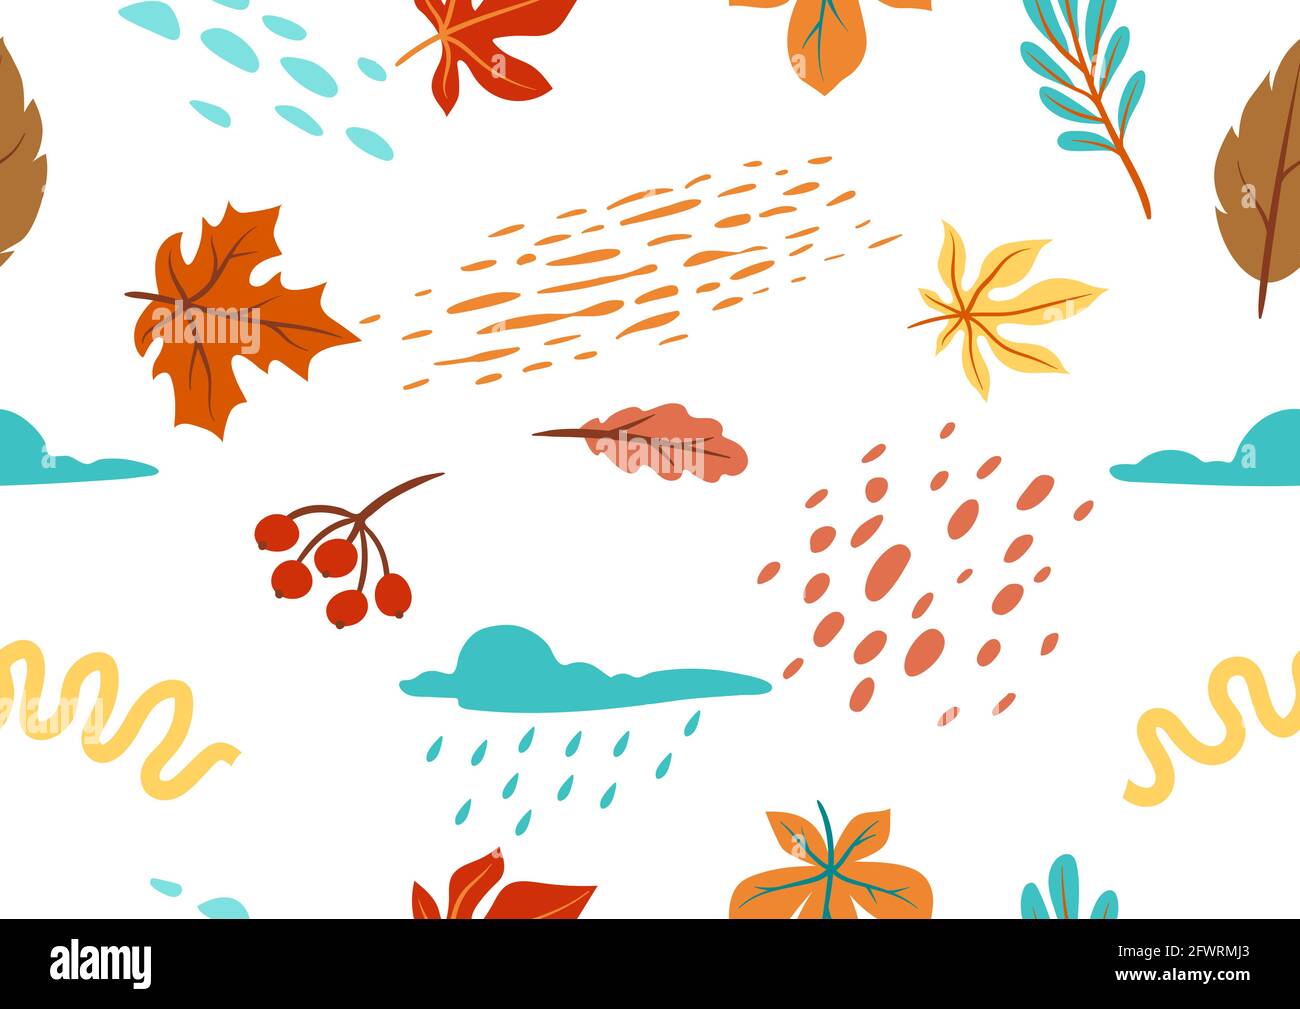 Seamless floral pattern with autumn foliage. Background of falling leaves. Stock Vector